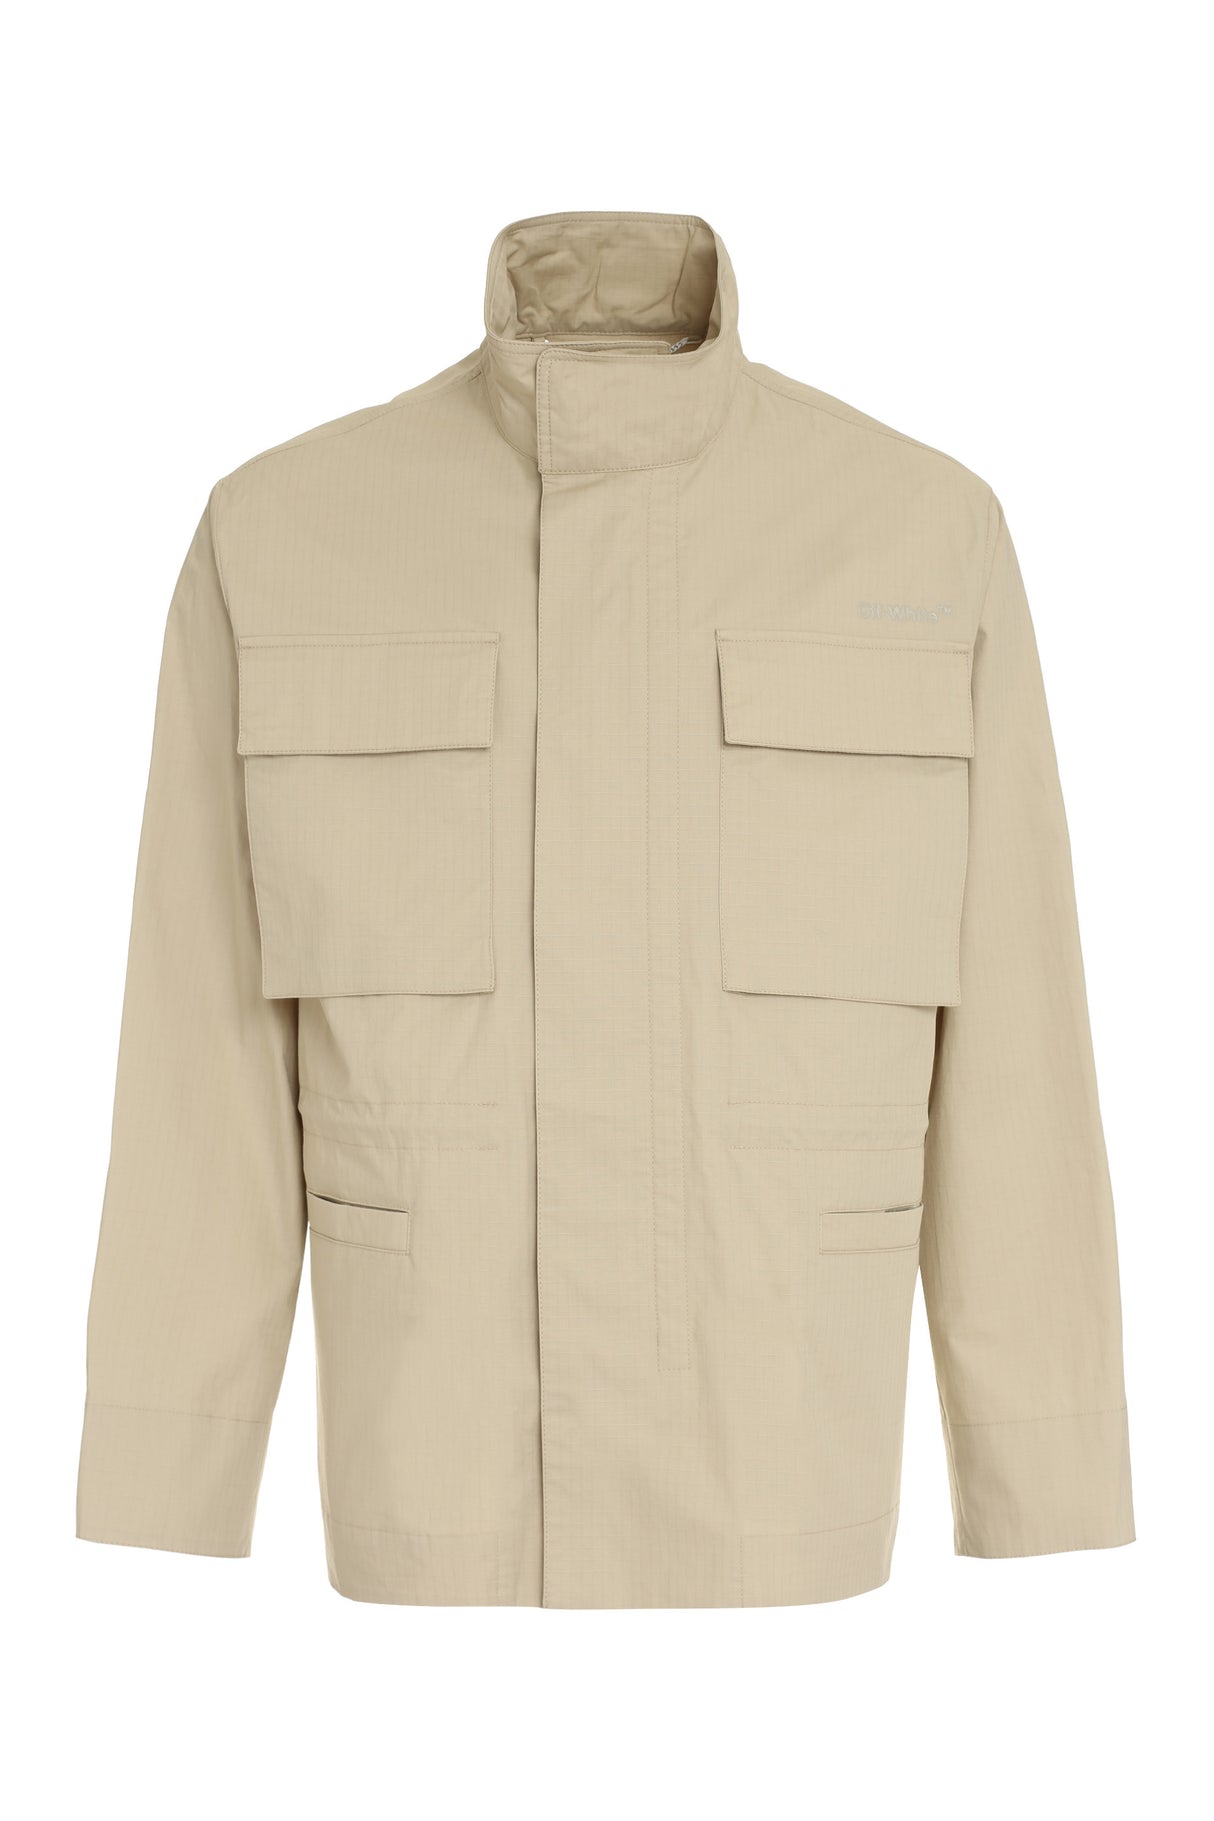 OFF-WHITE Beige Multi-Pocket Cotton Jacket with Adjustable Waist and Back Print